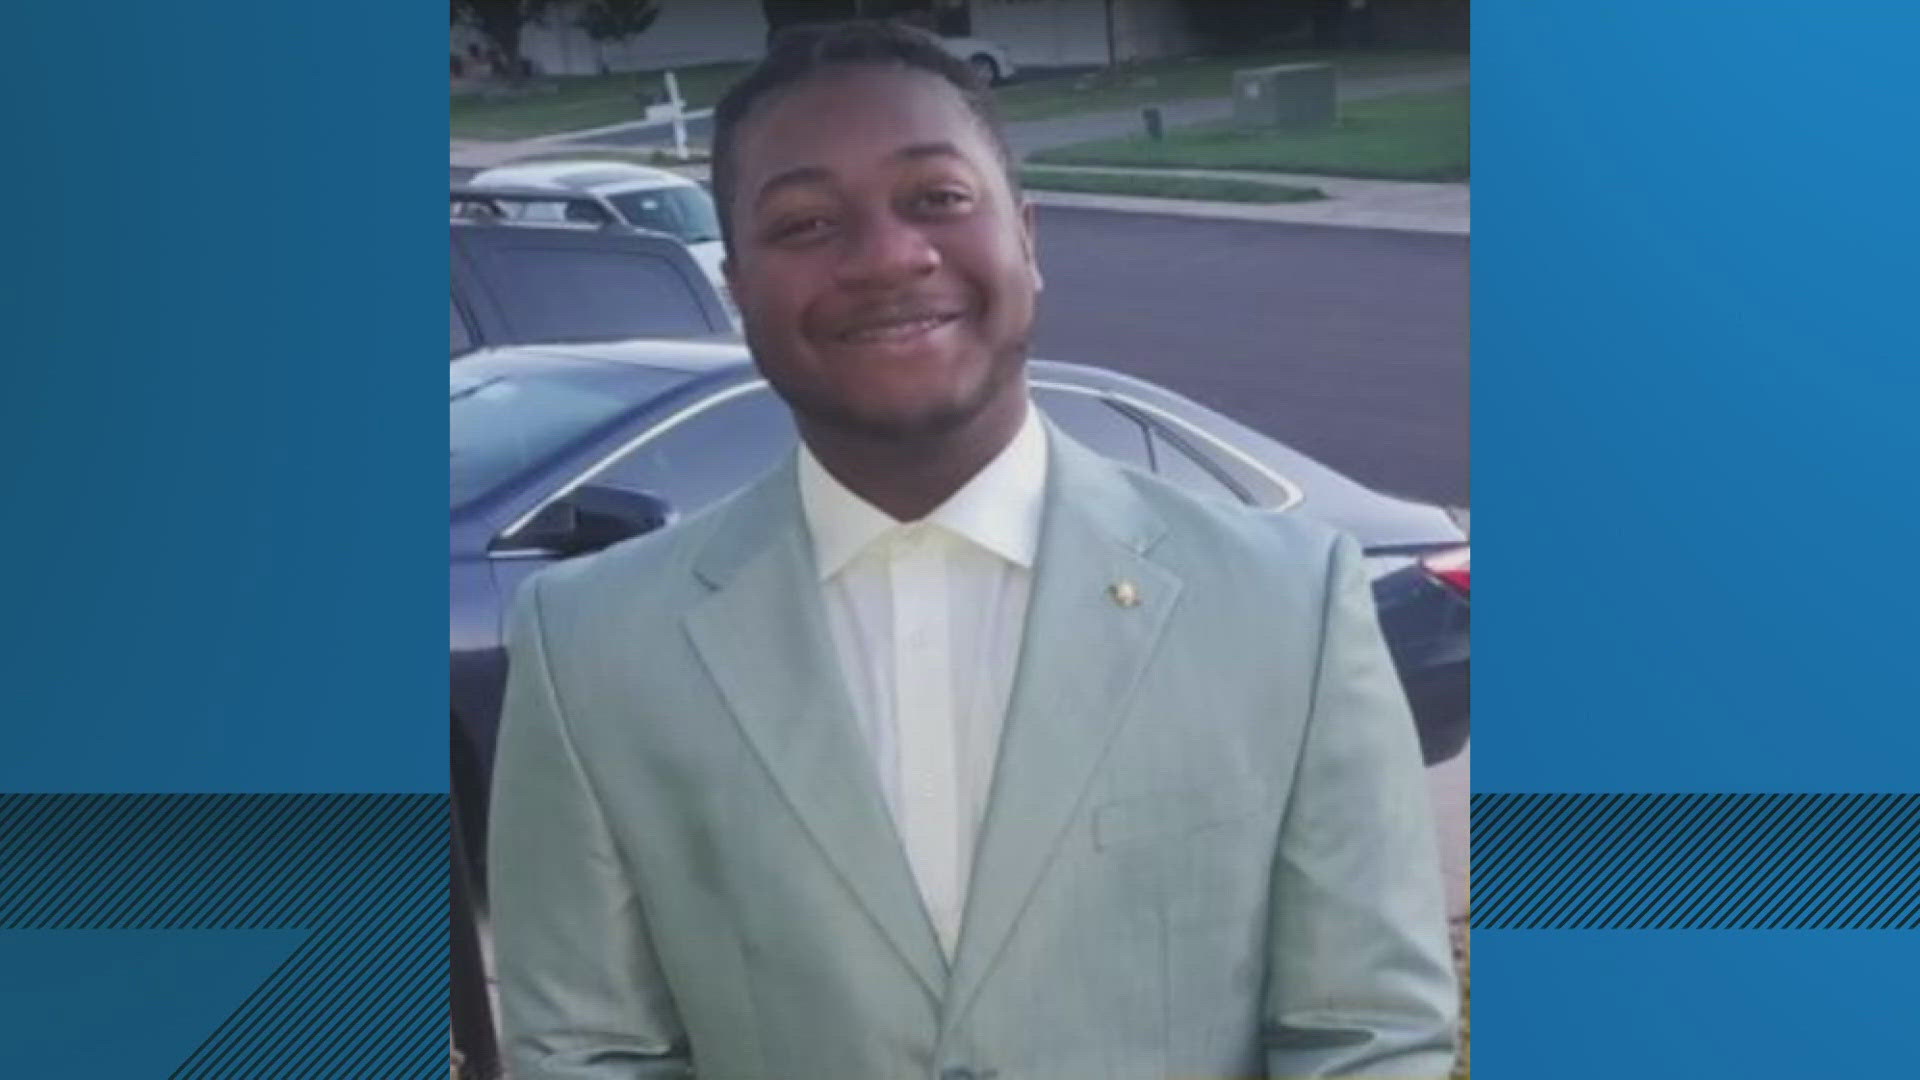 An 18-year-old Howard University student has died after he was hit by a car near the School of Business.